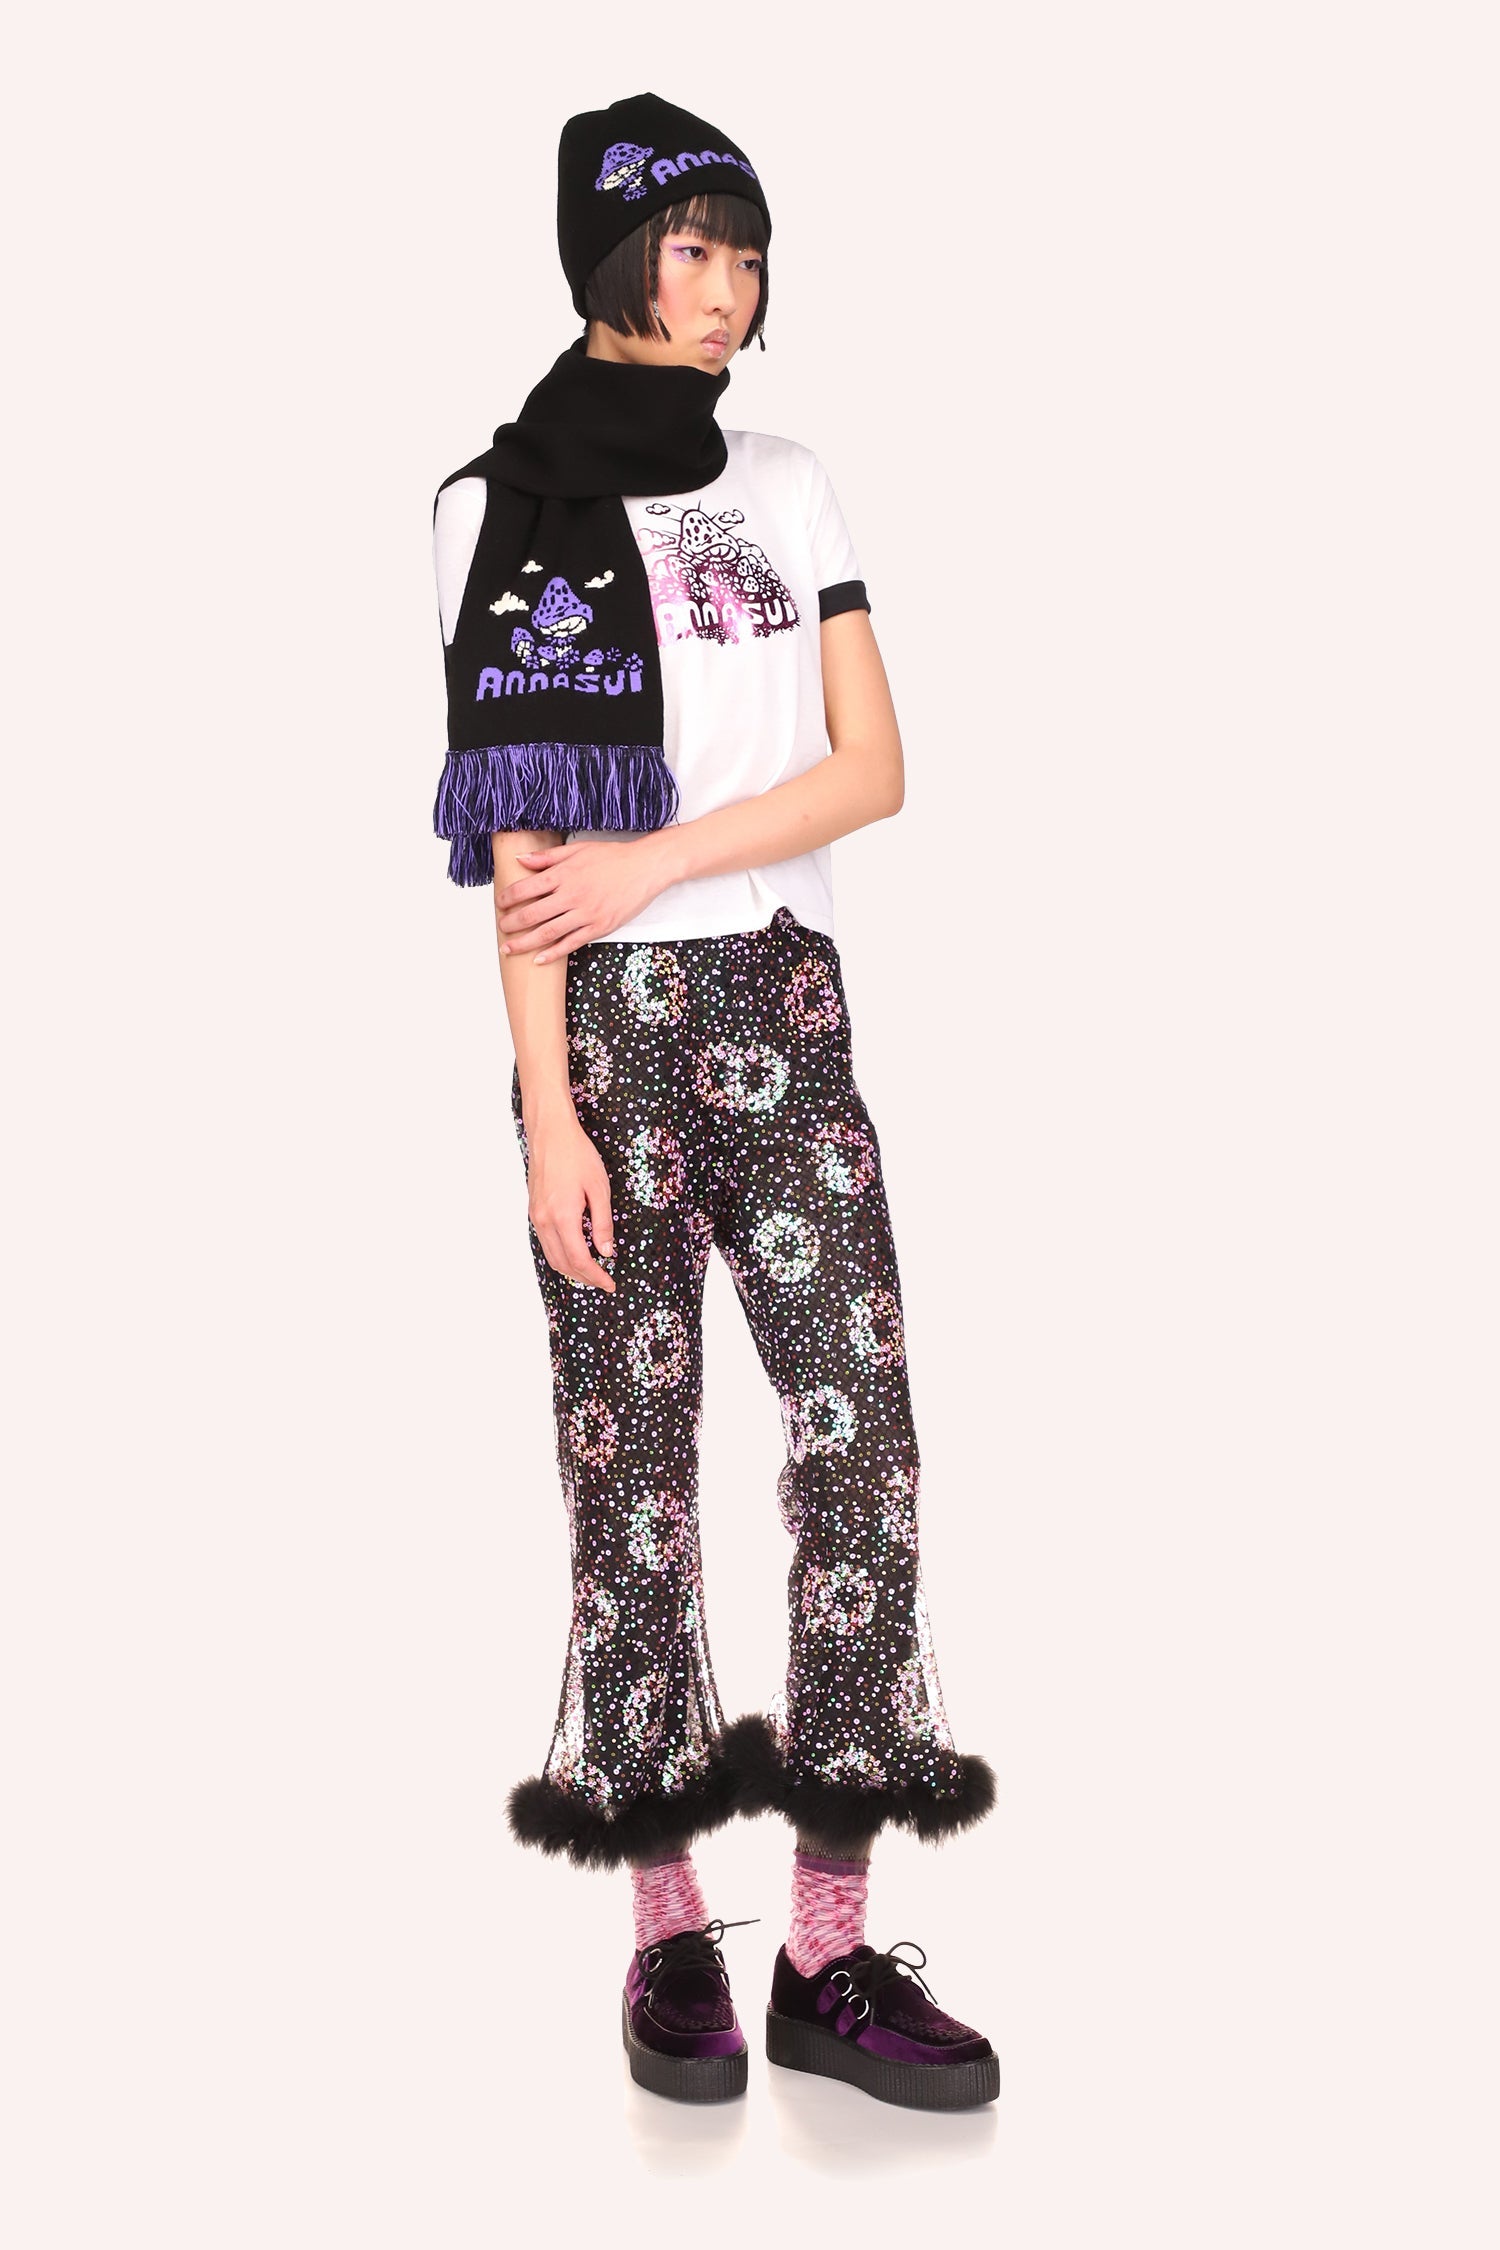 Mushroom Foil Tee can be worn under any of other Anna Sui clothing attire